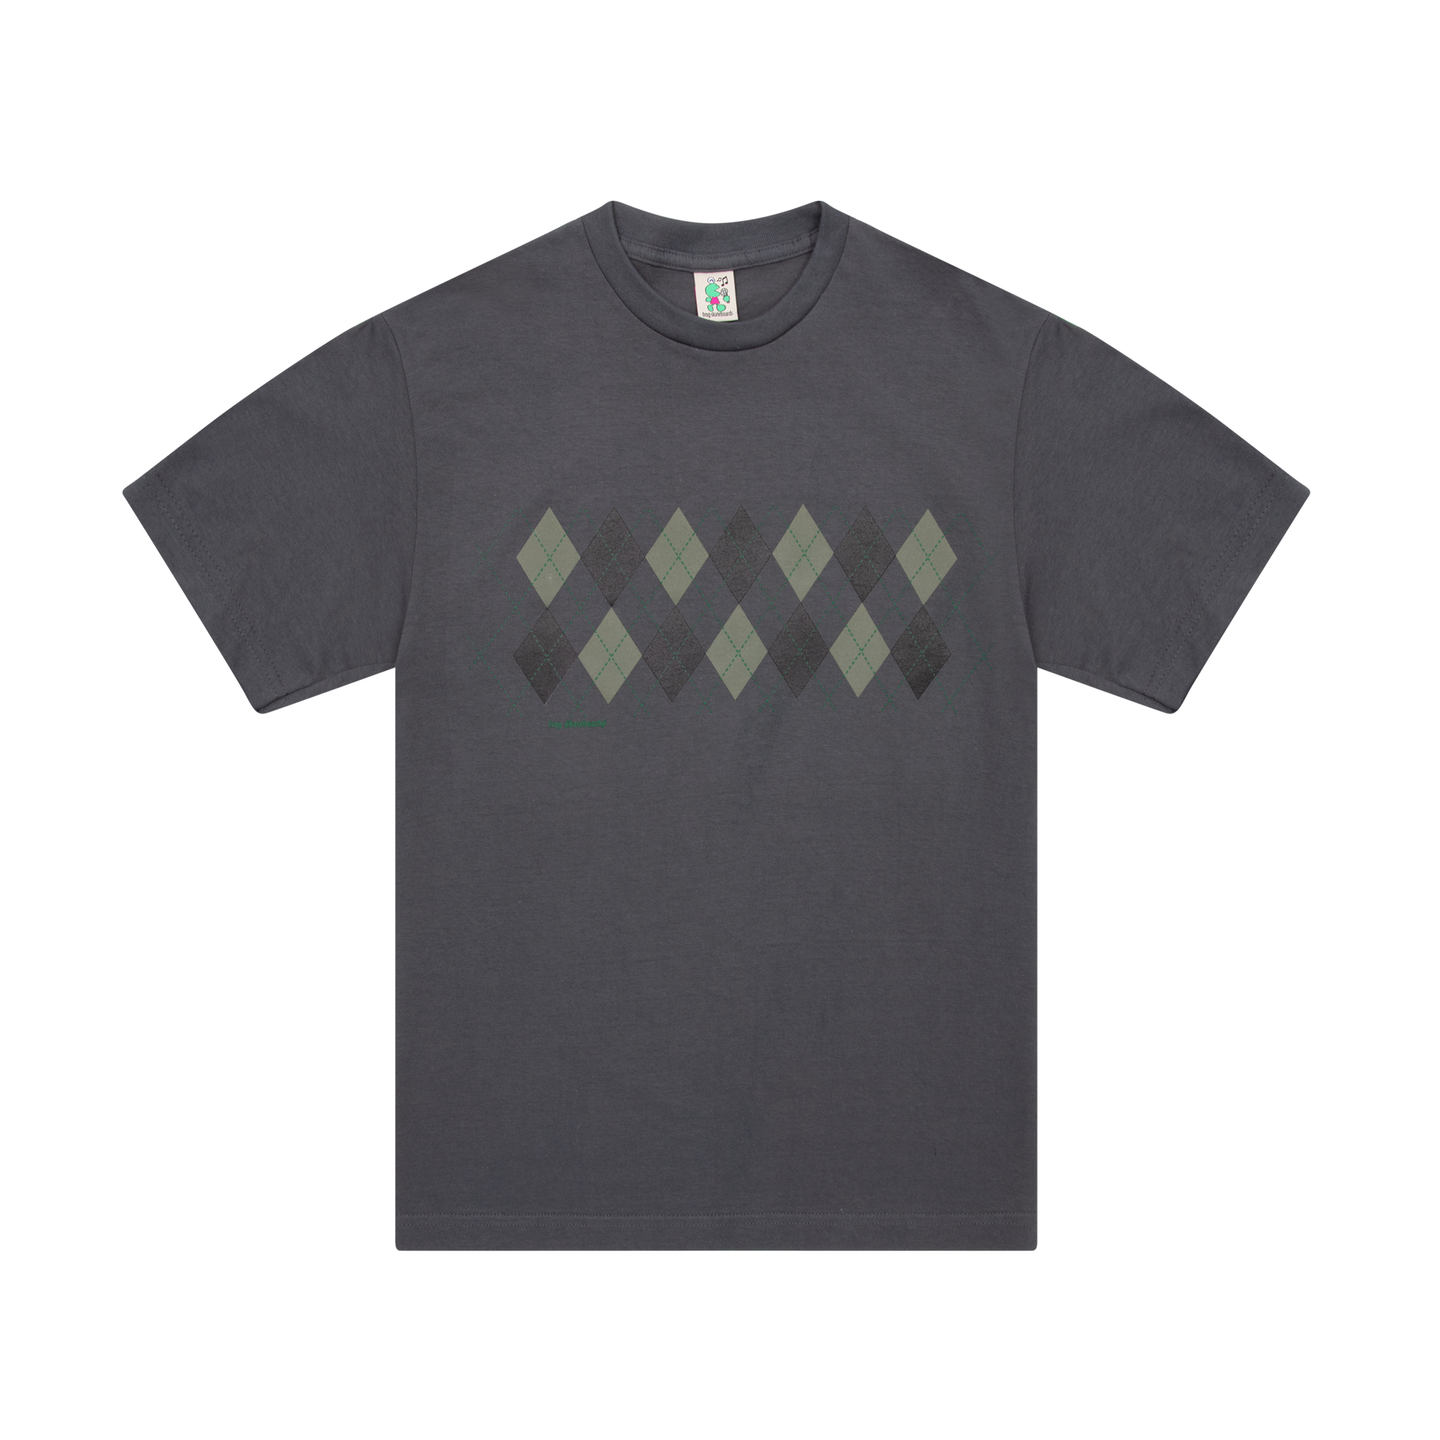 Total Argyle Tee (Charcoal)